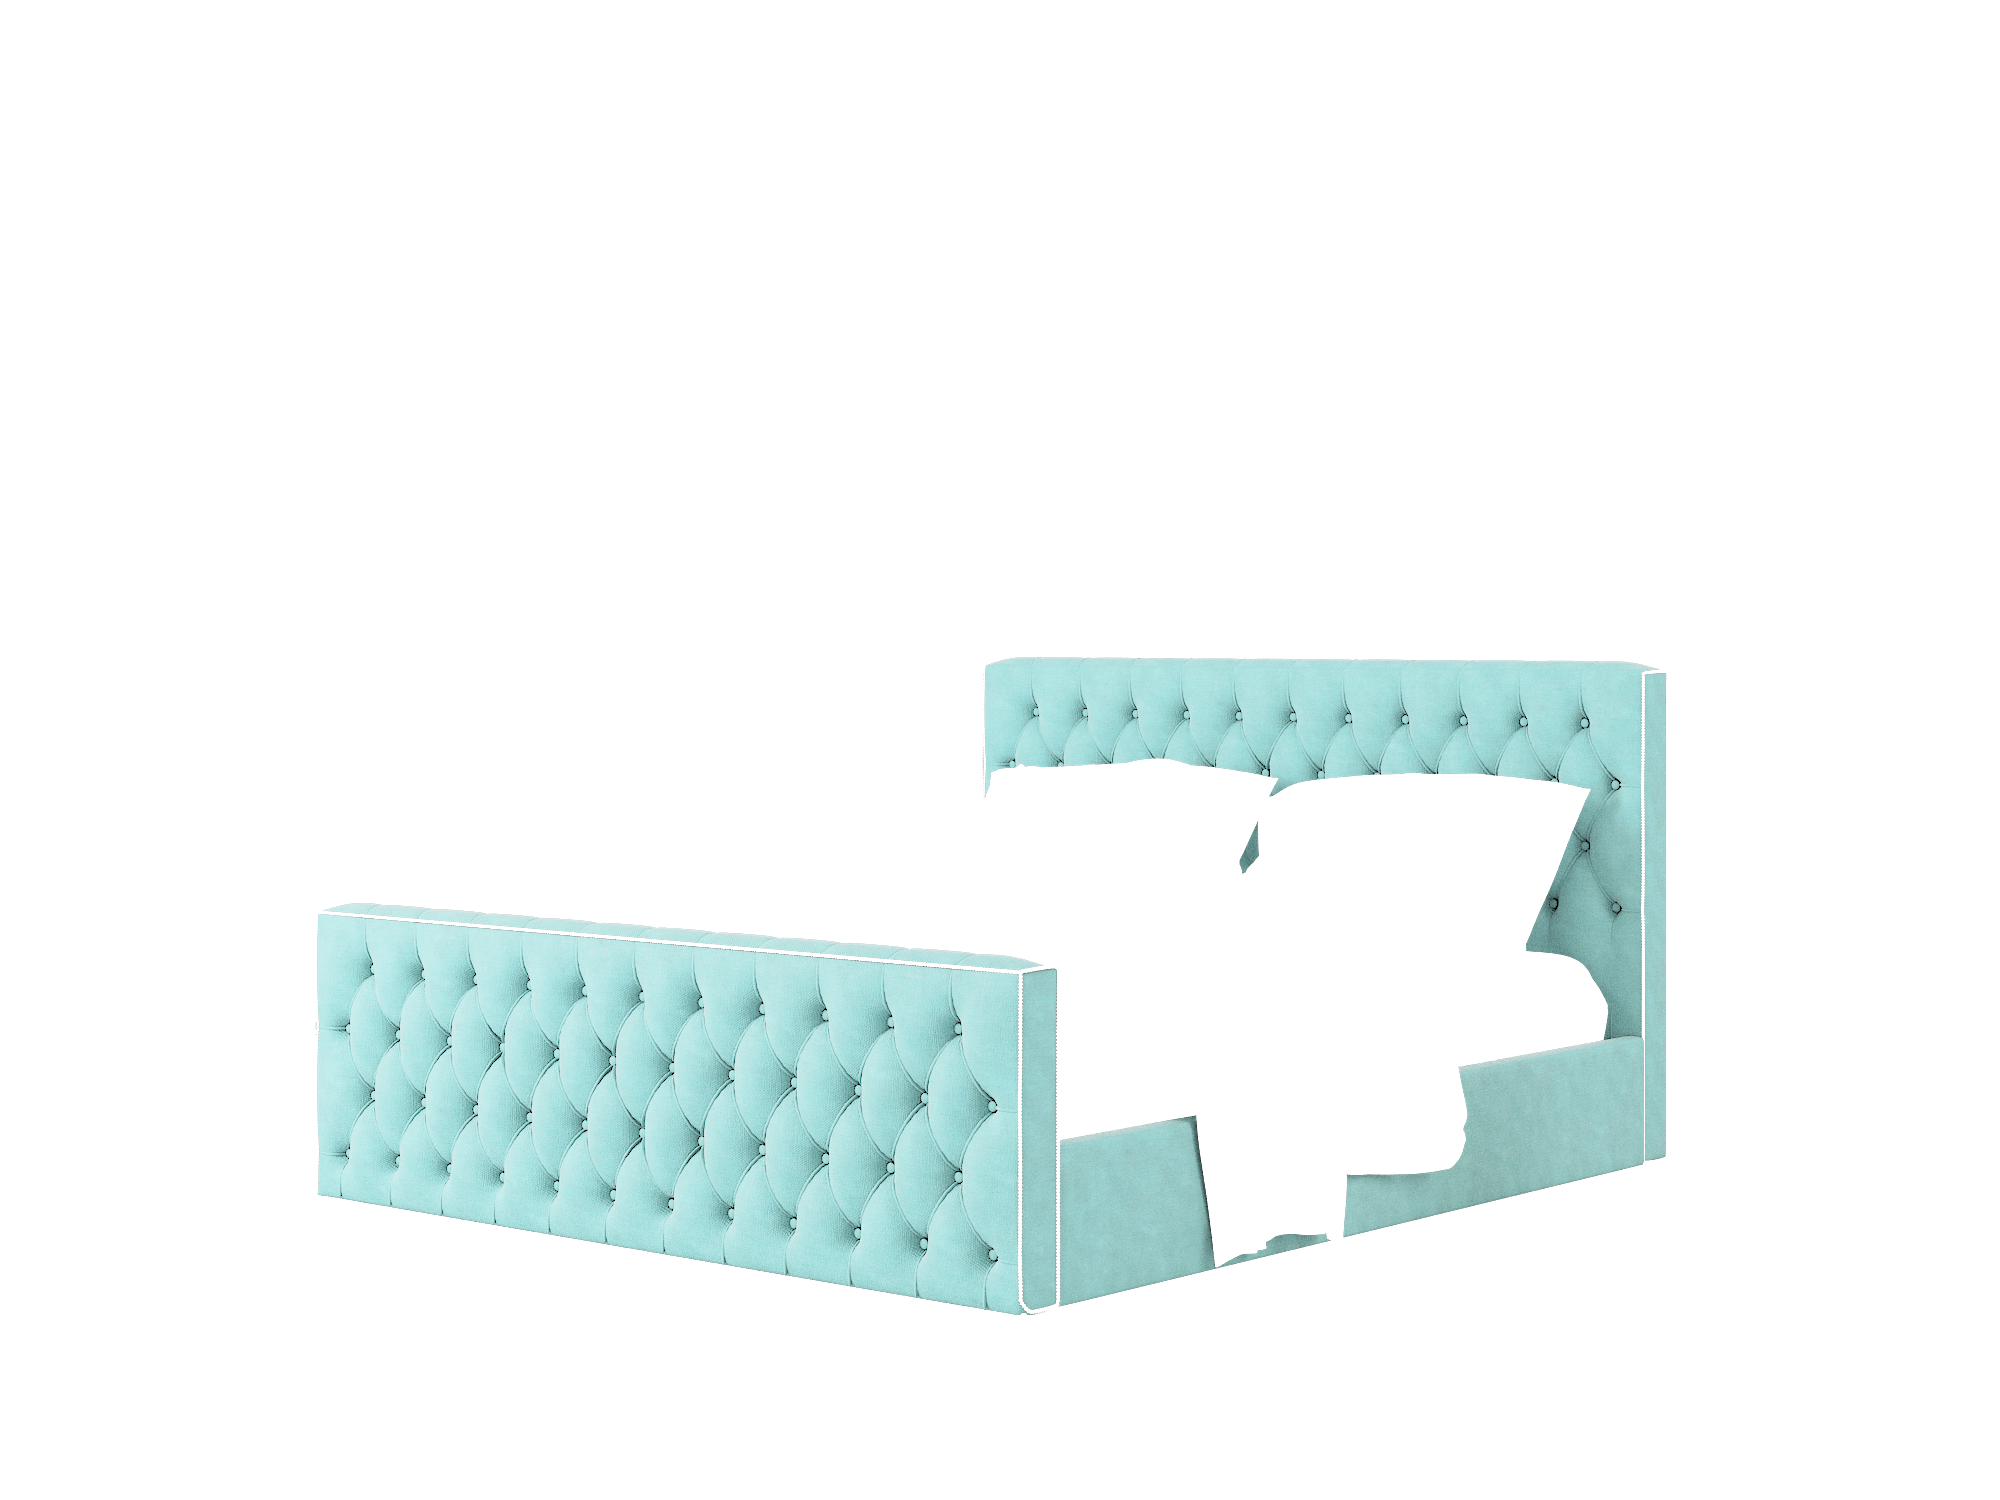 Aida Curious Turquoise Bed King Room Texture